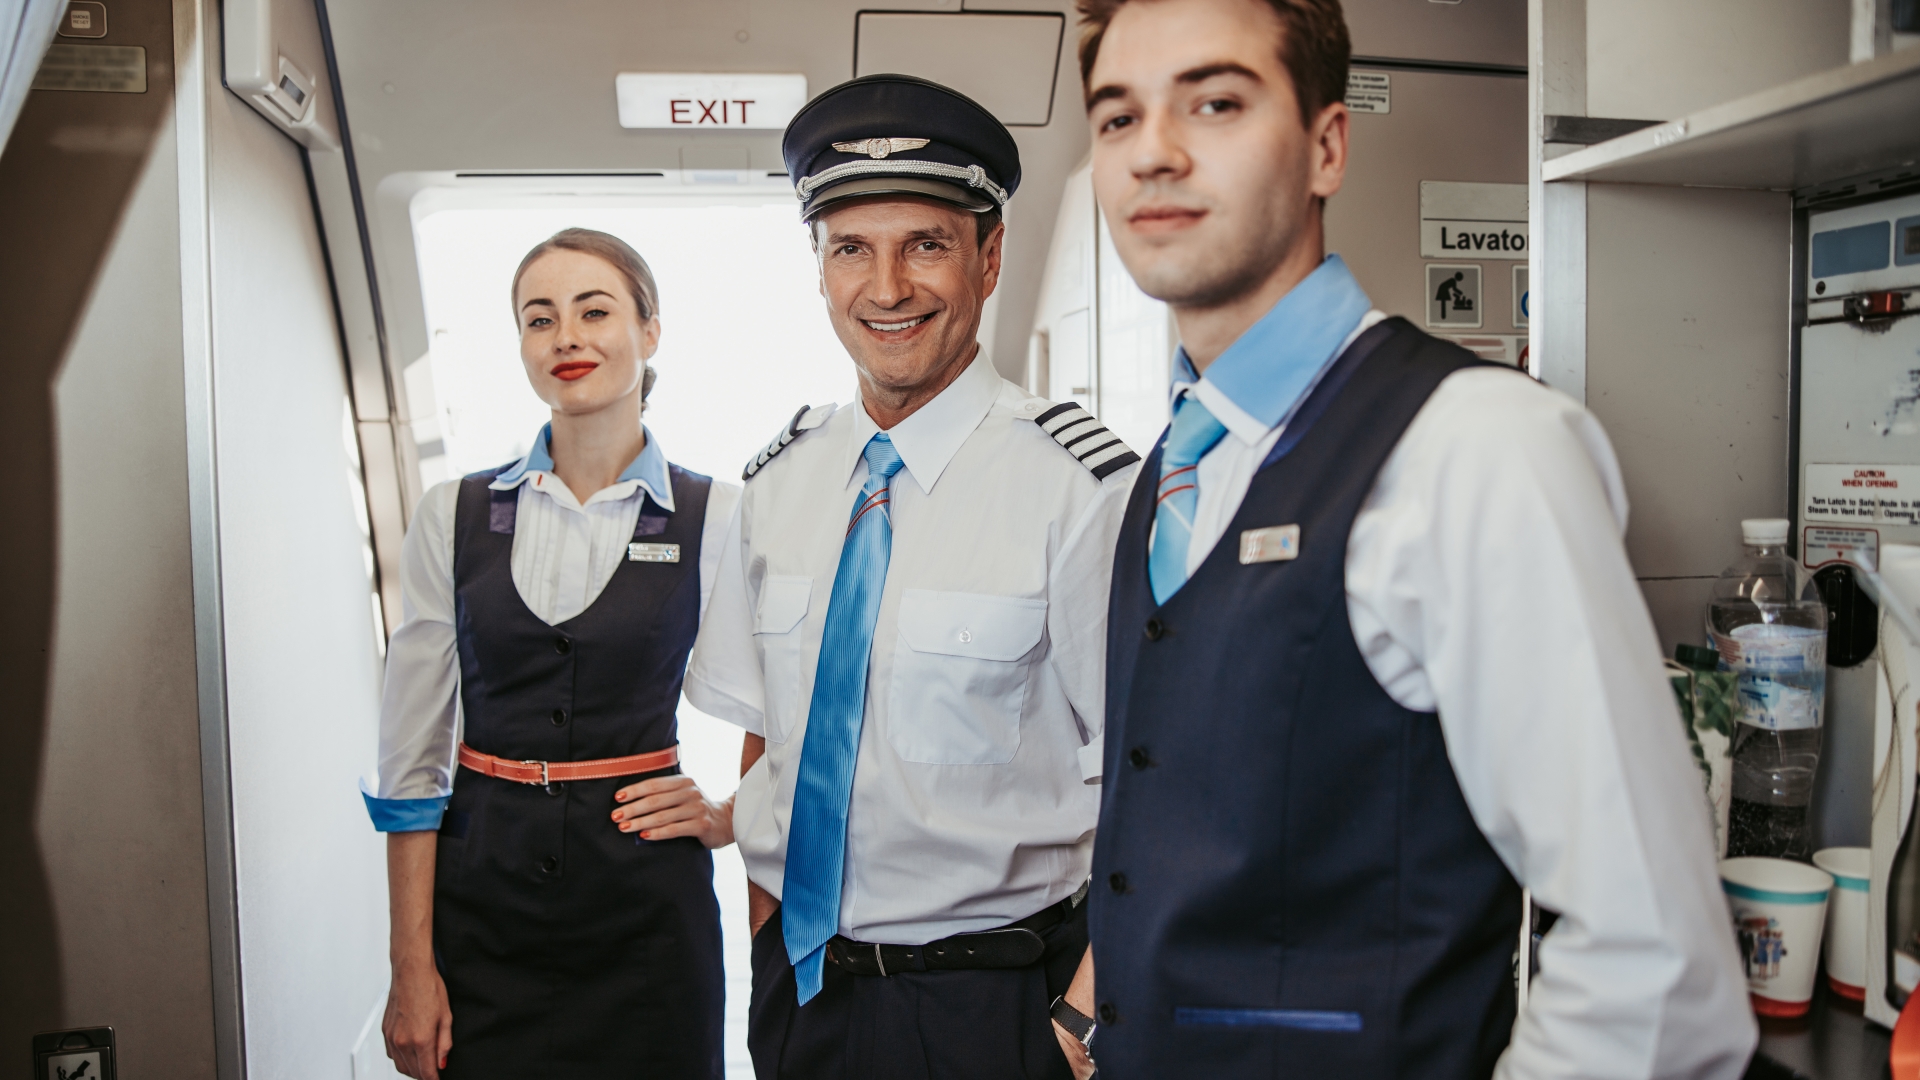 Fury airline enforces new rules on flight attendants, including no grey hair and no bald patches